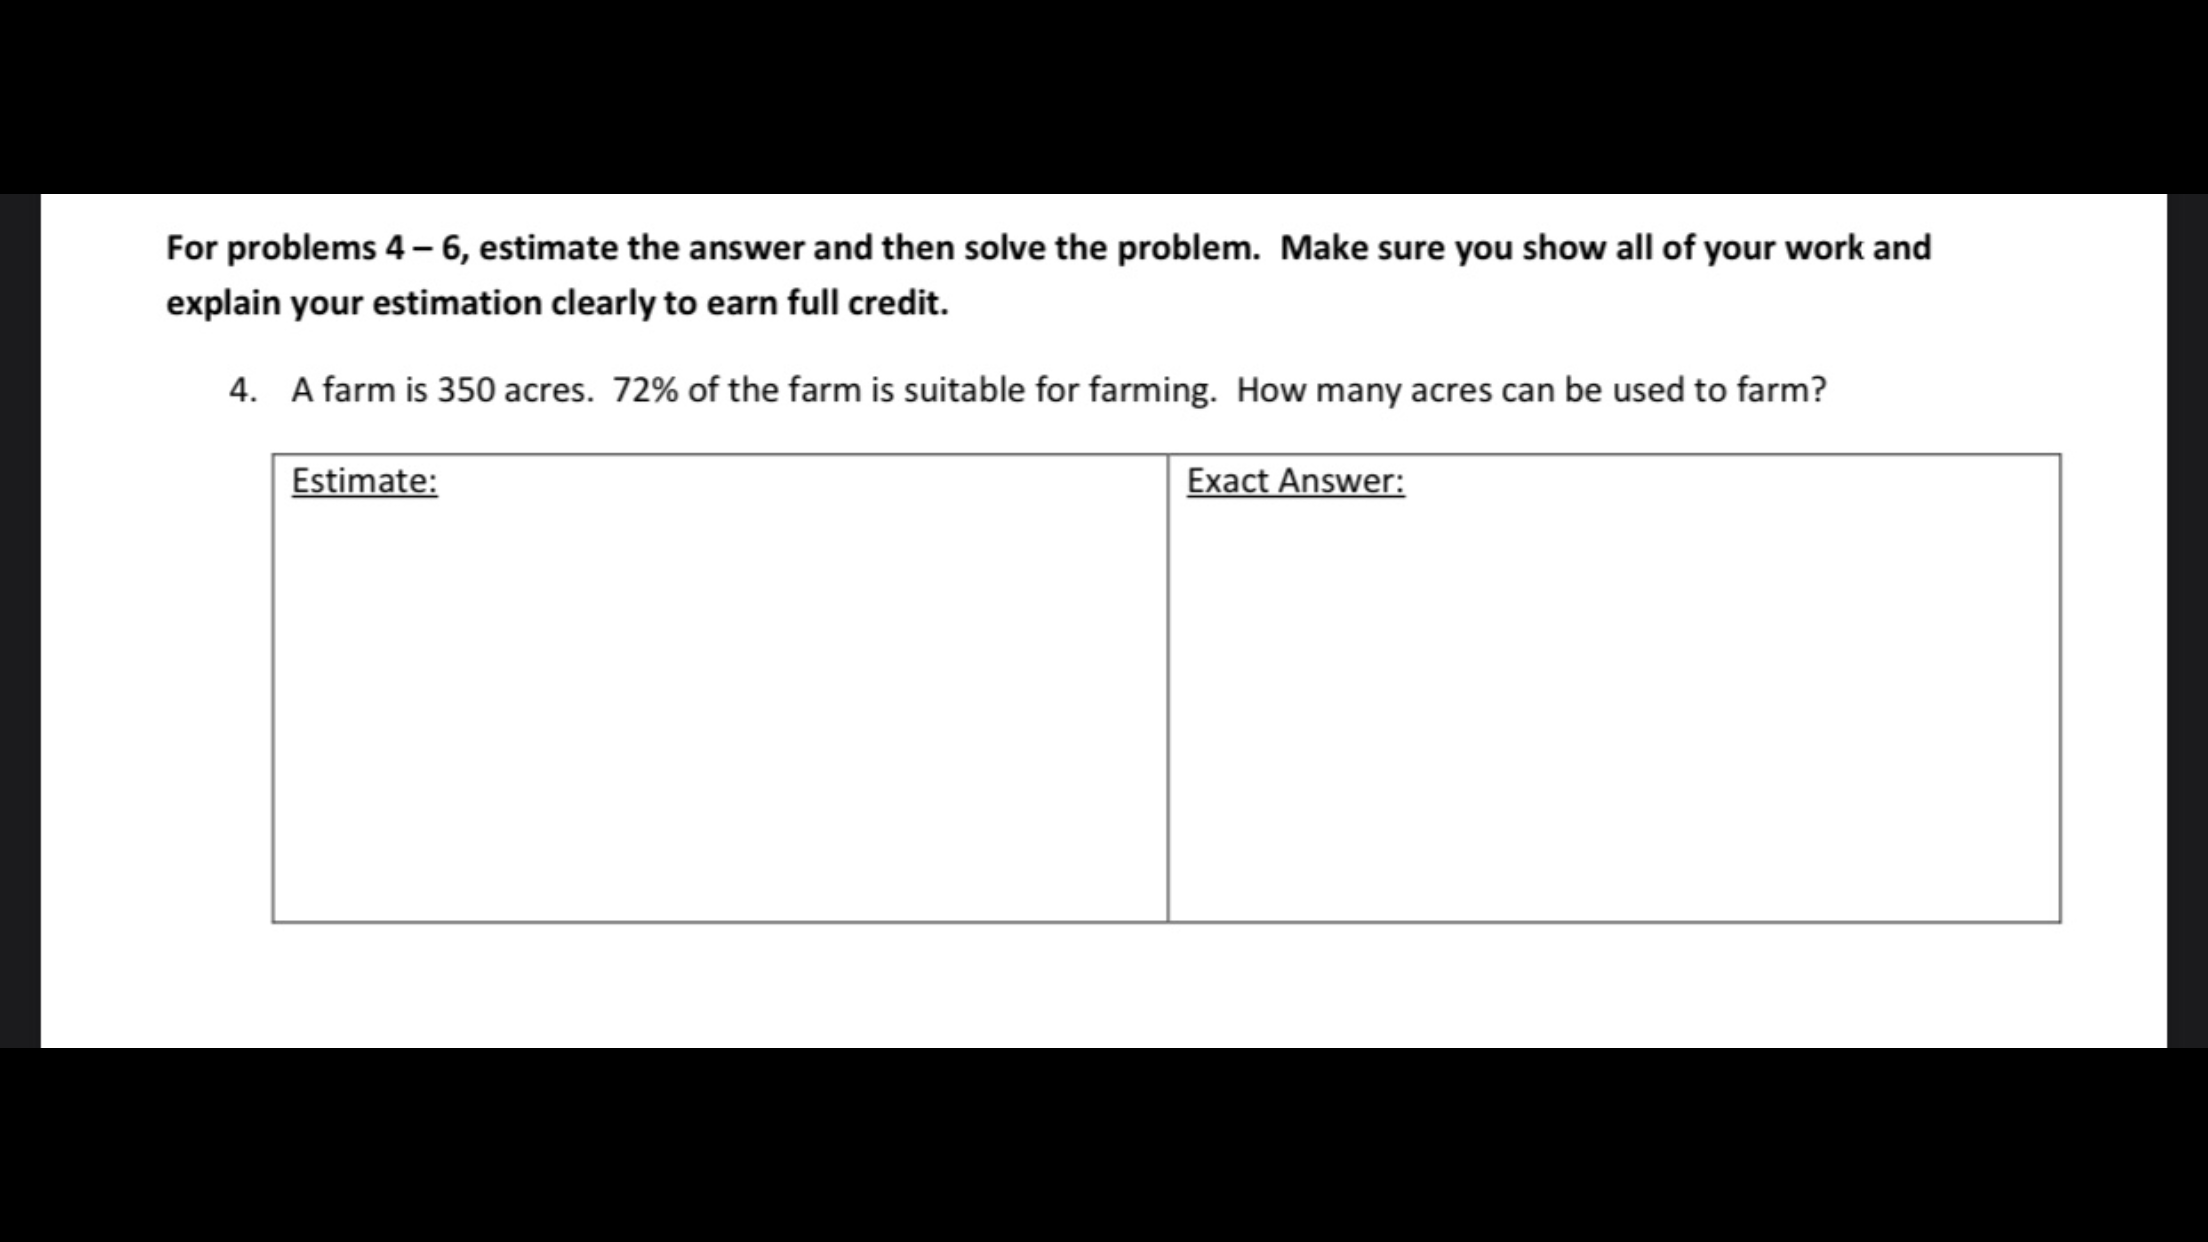 4. A farm is 350 acres. 72% of the farm is suitable for farming. How many acres can be used to farm?
